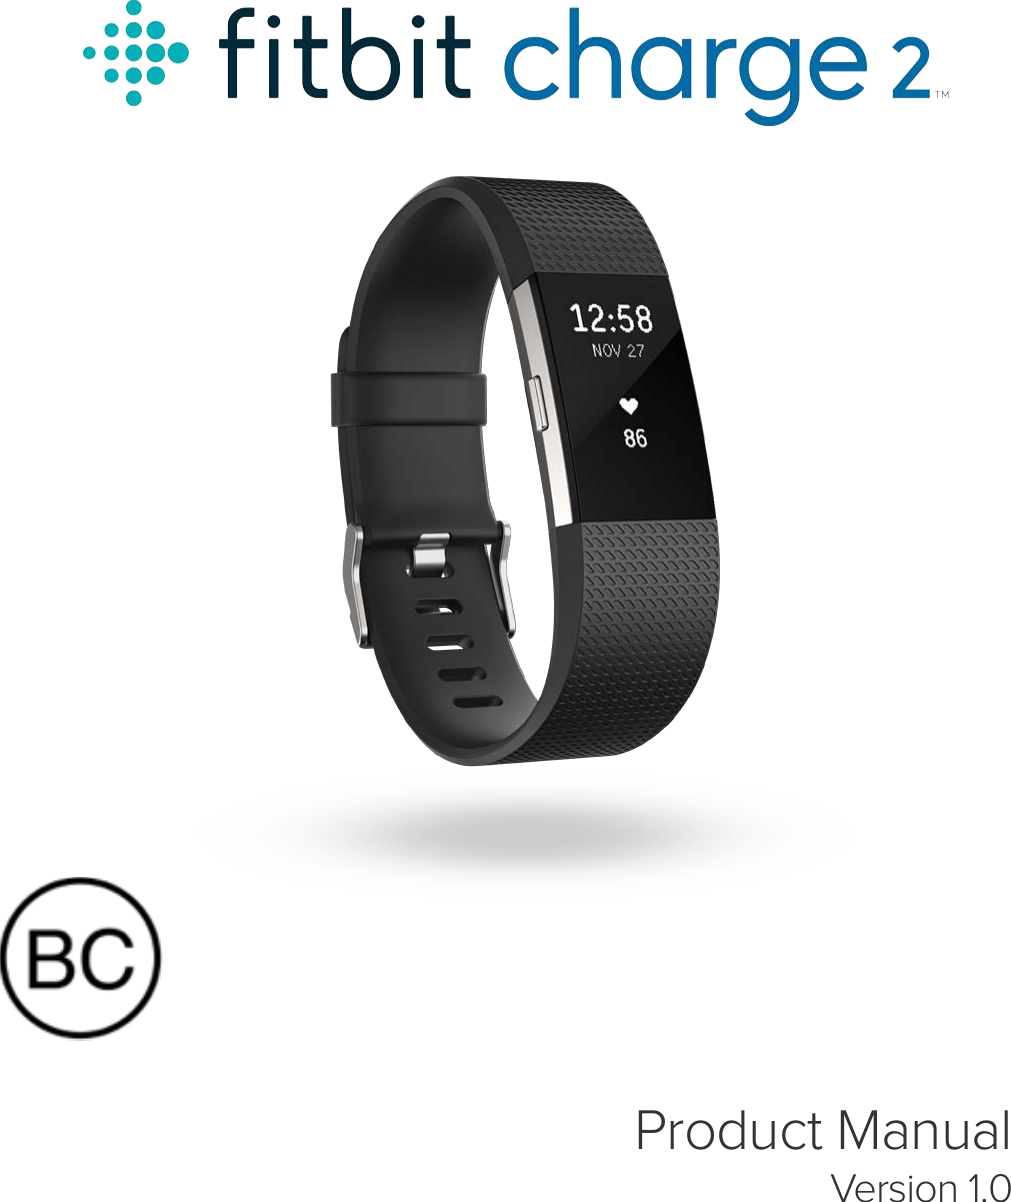 Fitbit Charge 2 Product Manual 1.0x En